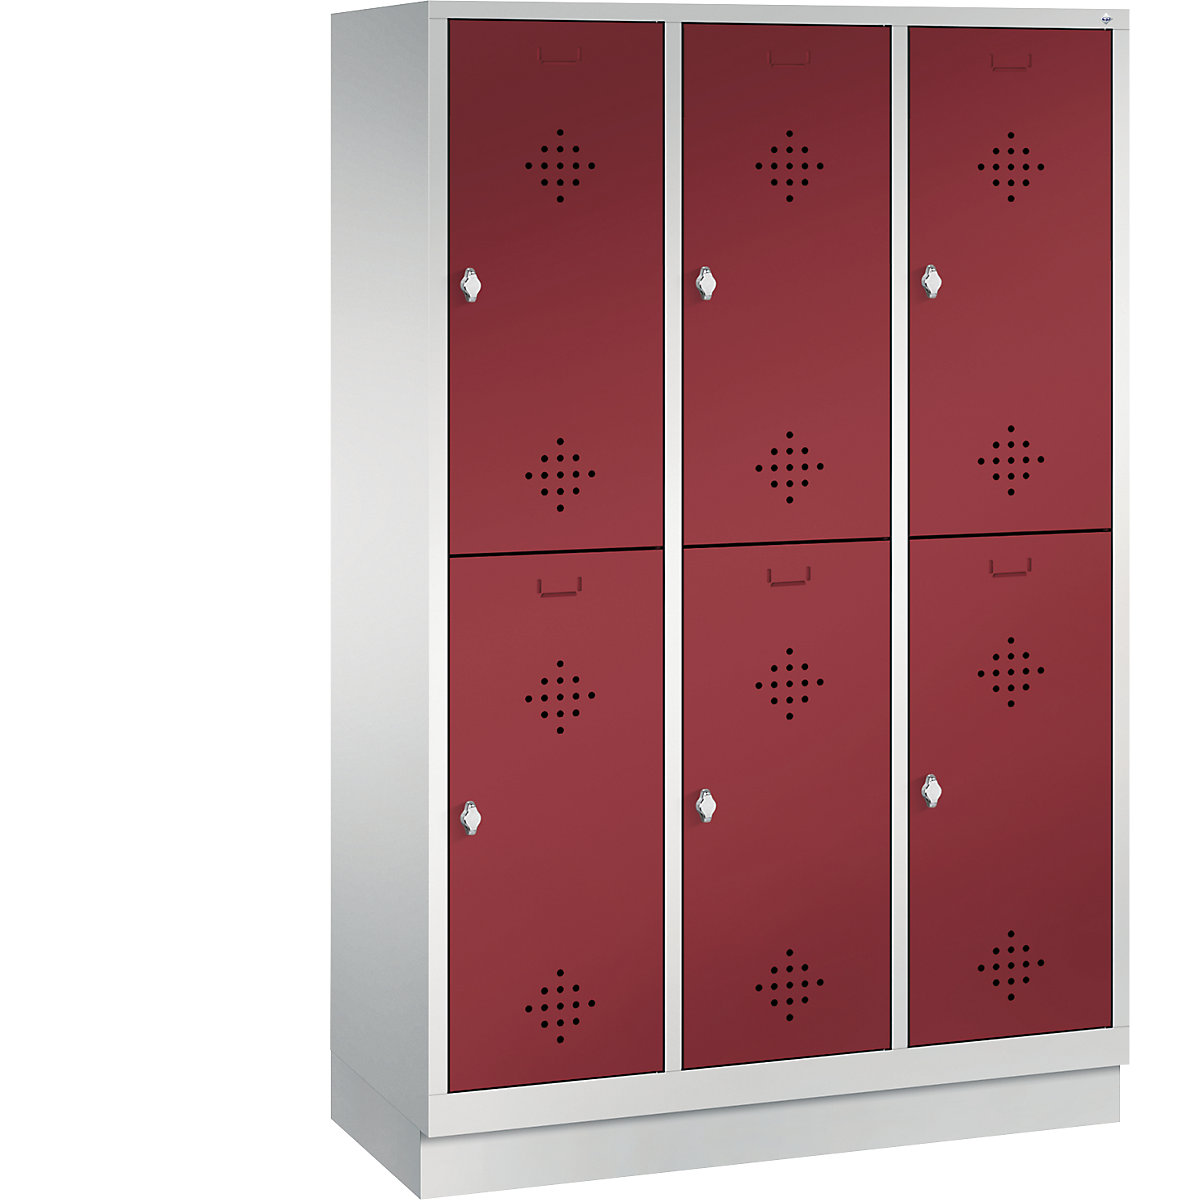 CLASSIC cloakroom locker with plinth, double tier – C+P, 3 compartments, 2 shelf compartments each, compartment width 400 mm, light grey / ruby red-3